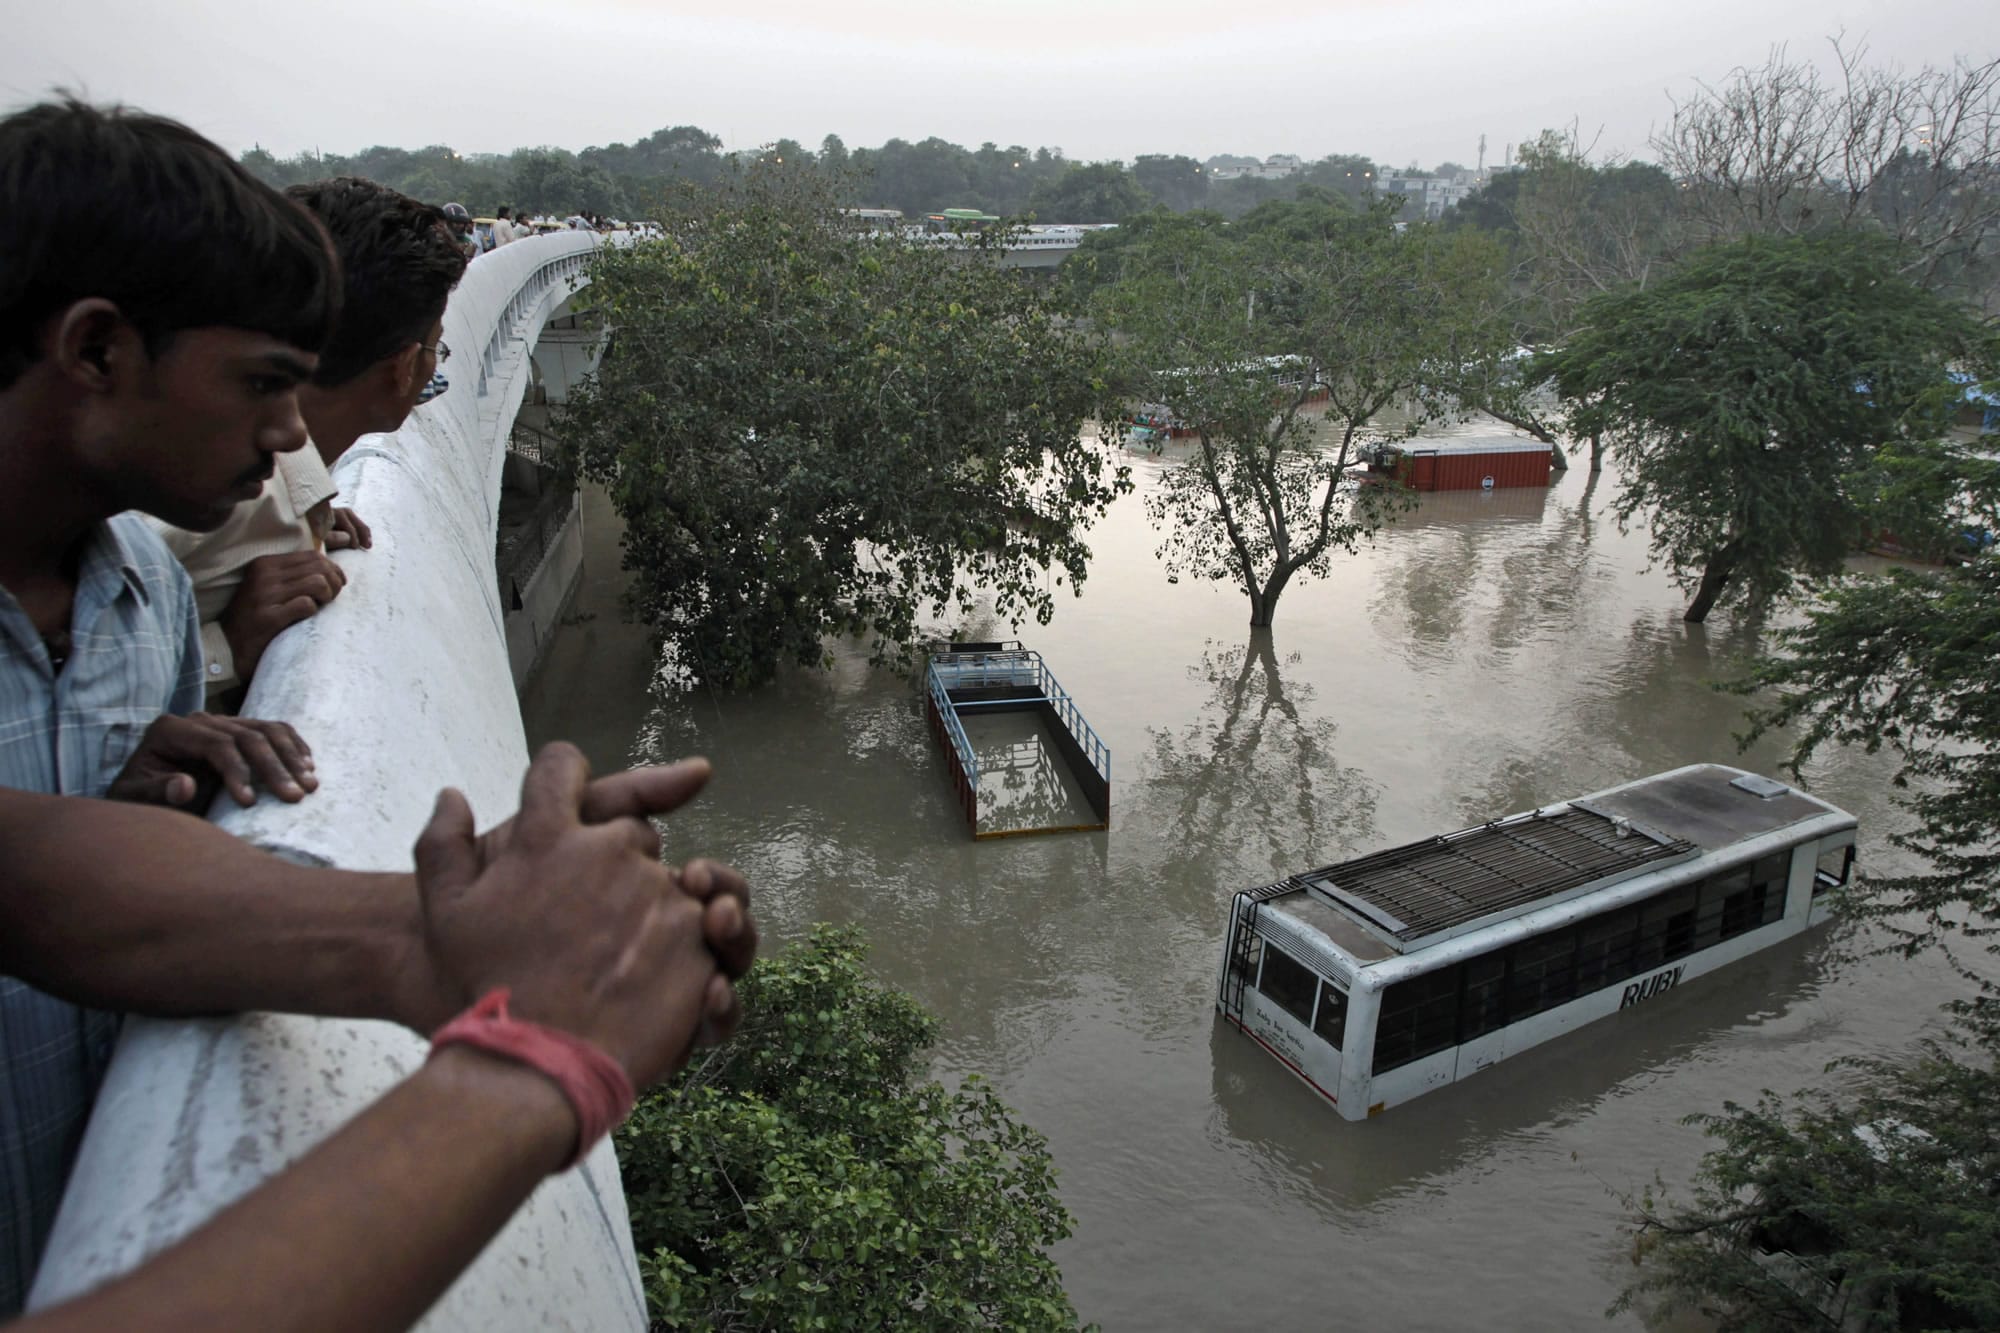 People gather to look at submerged buses and trucks in the rising Yamuna River as they stand on a flyover in New Delhi, India, on Wednesday.